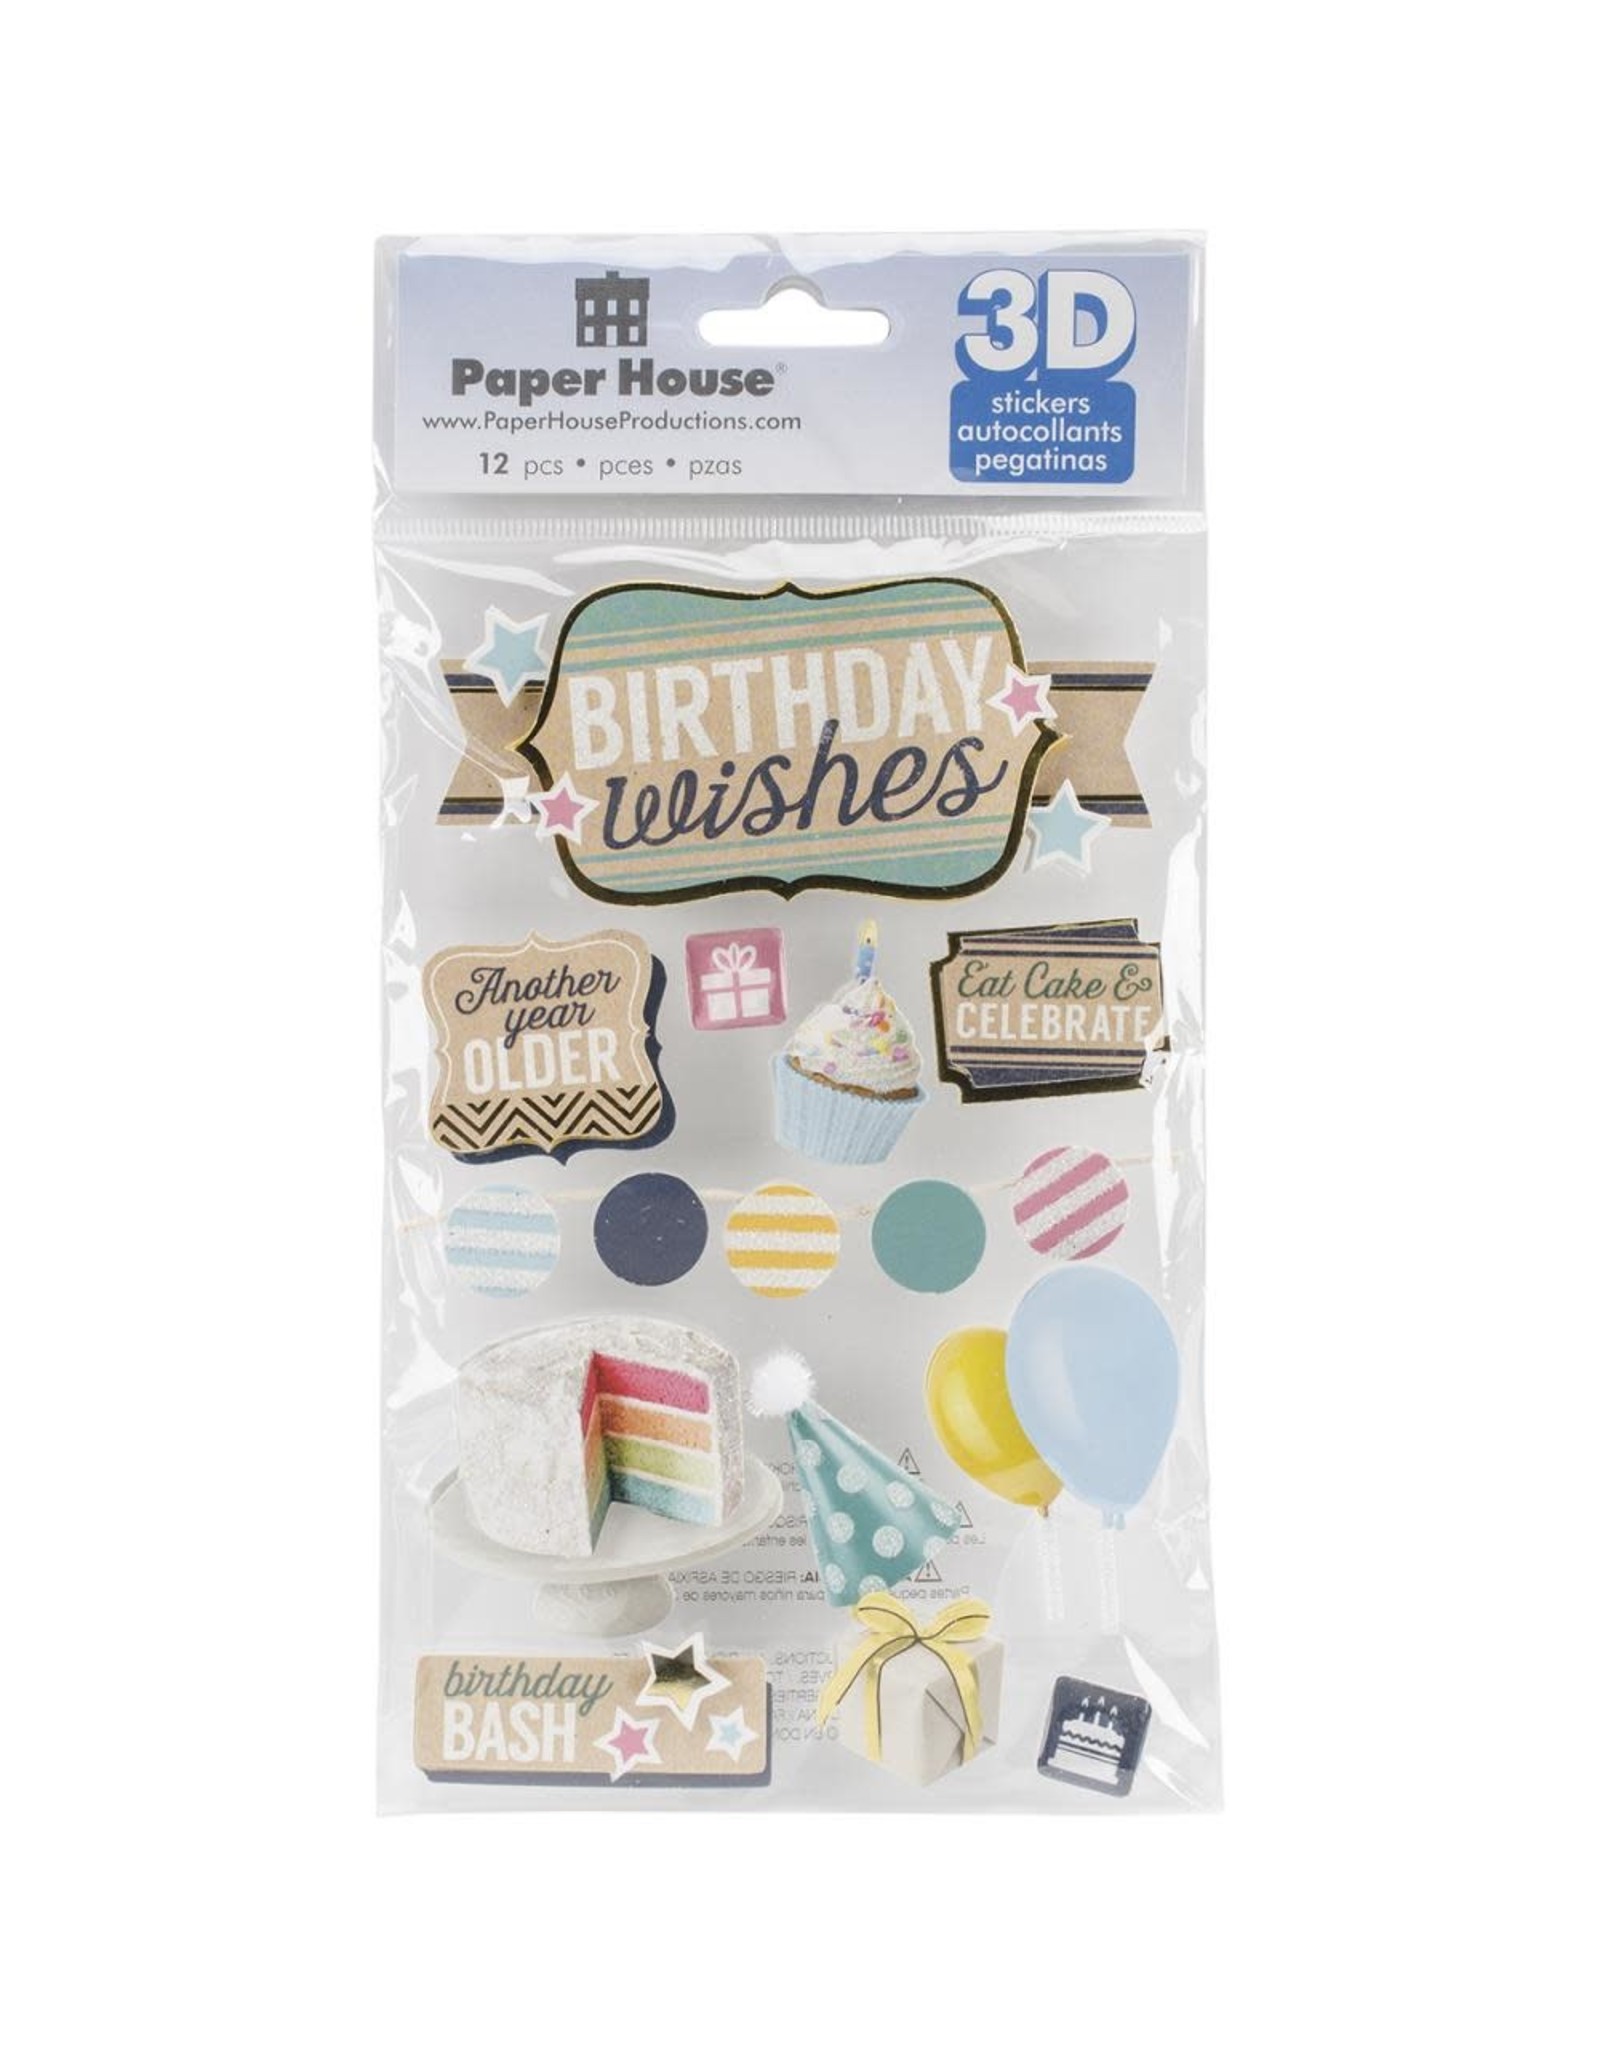 PAPER HOUSE PRODUCTIONS PAPER HOUSE BIRTHDAY WISHES 3D STICKERS